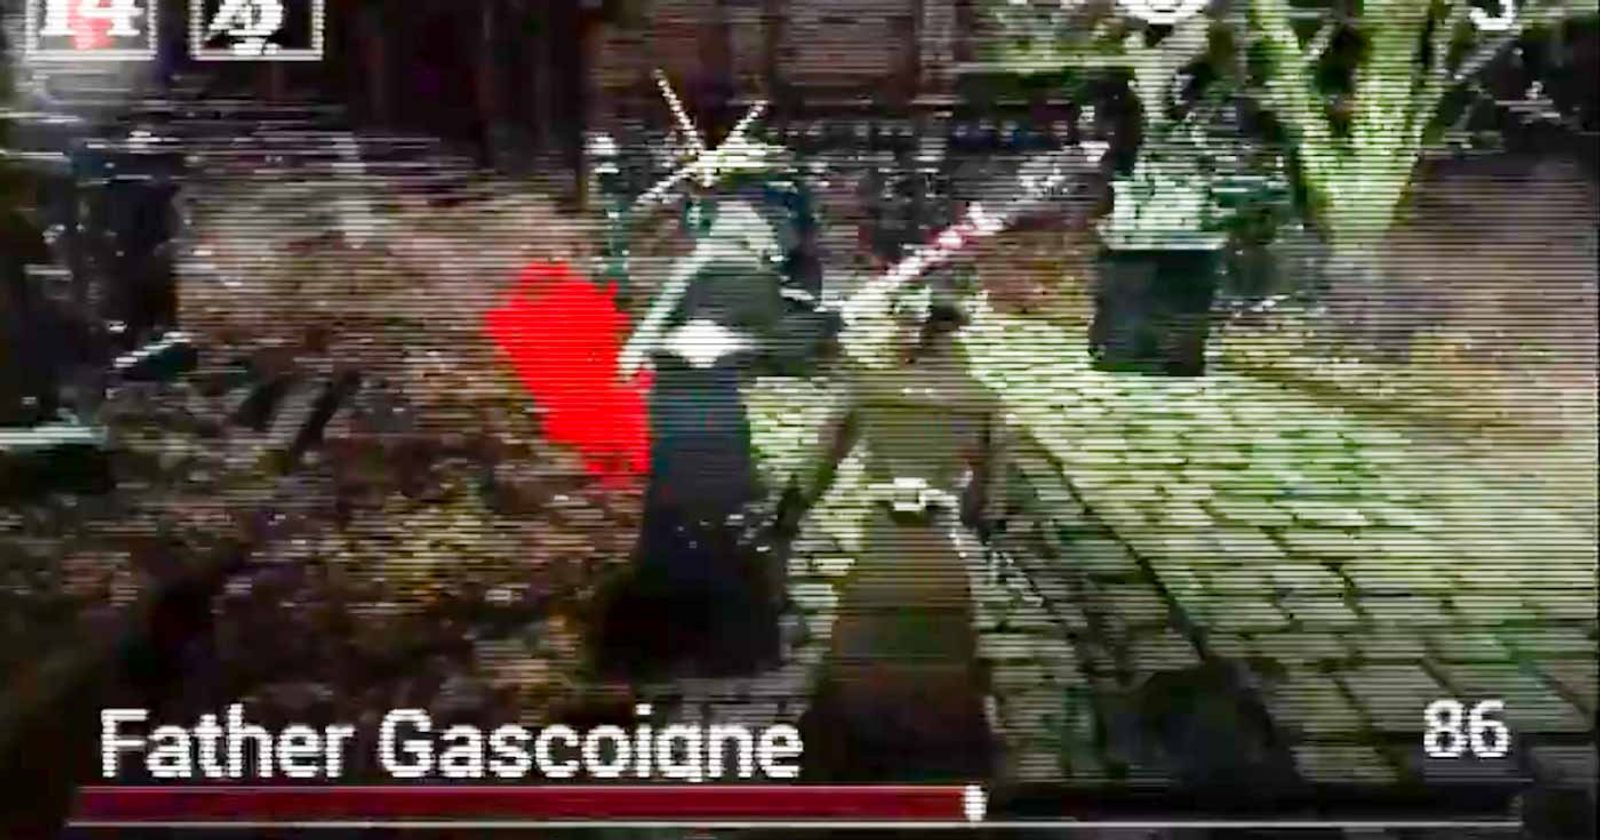 Does Bloodborne PS1 Demake Recreate The Full Game?